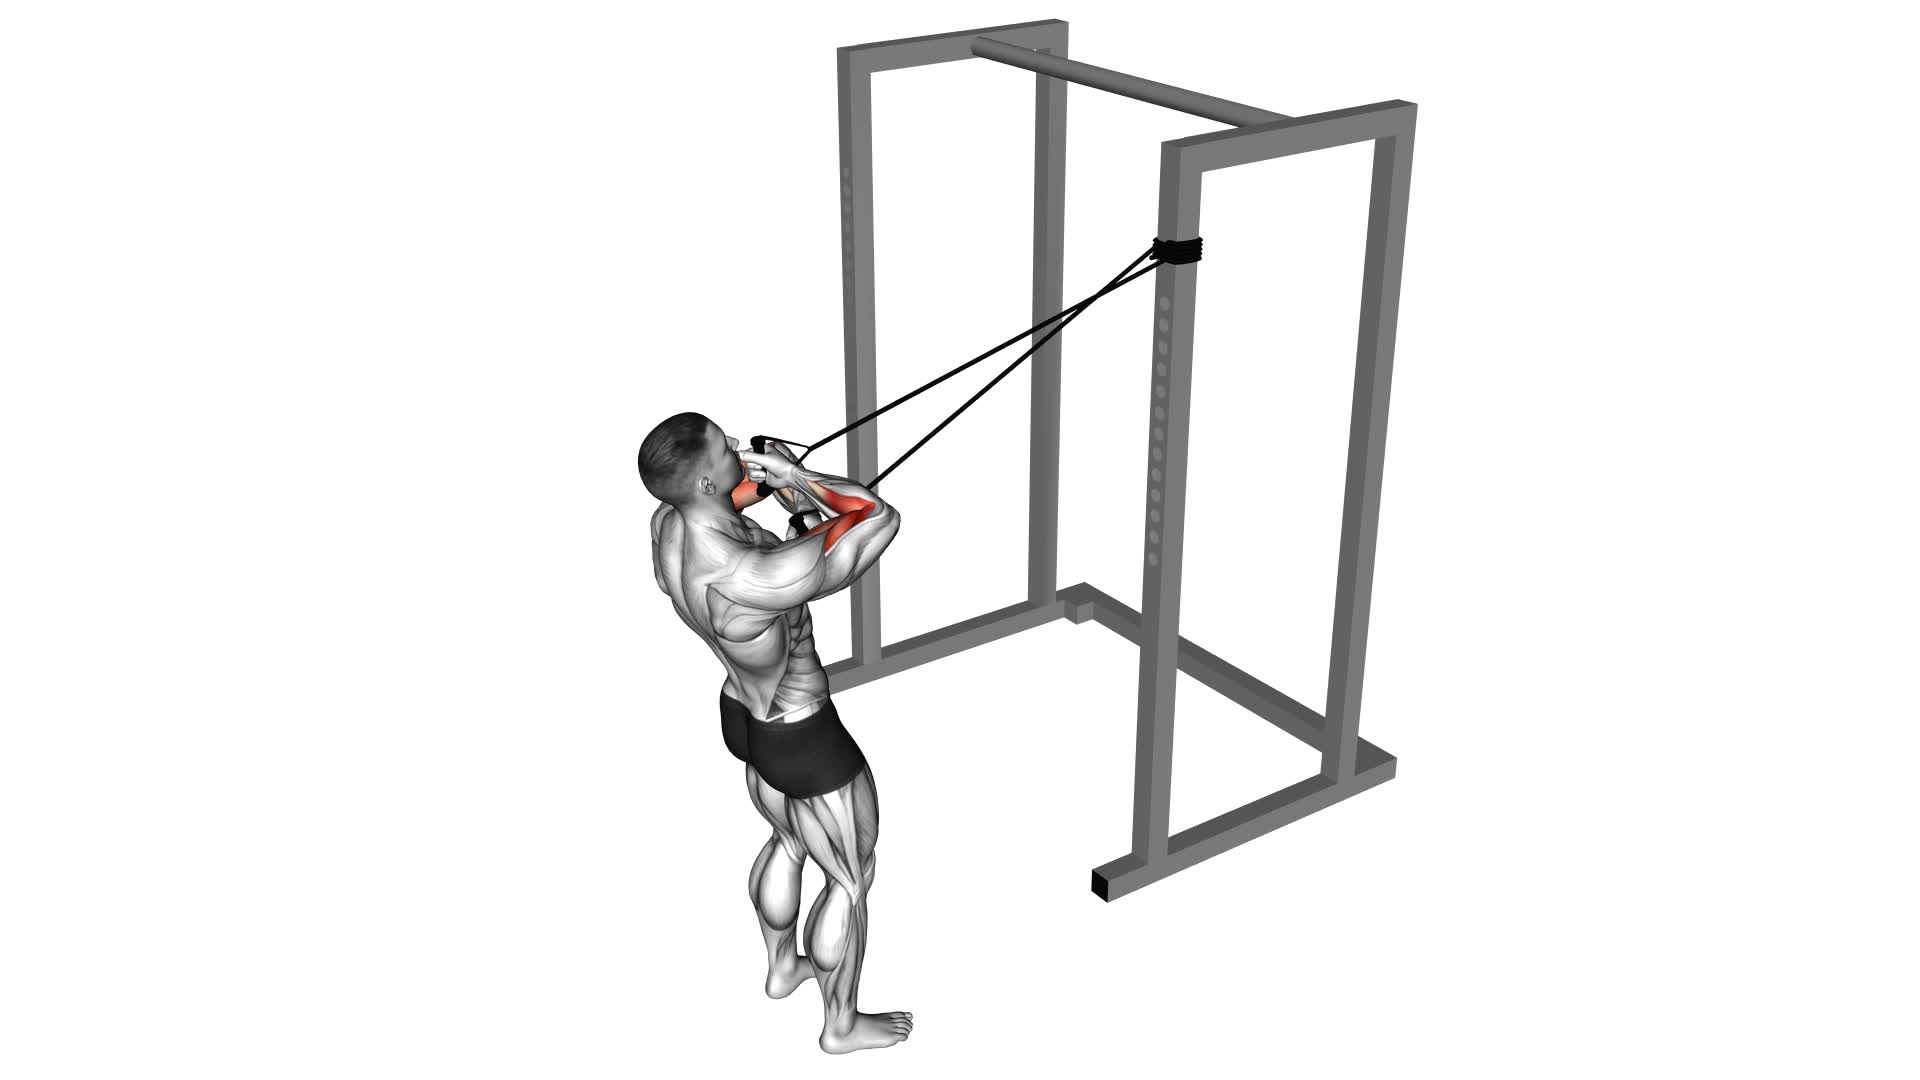 Band Cross Chest Biceps Curl (male) - Video Exercise Guide & Tips